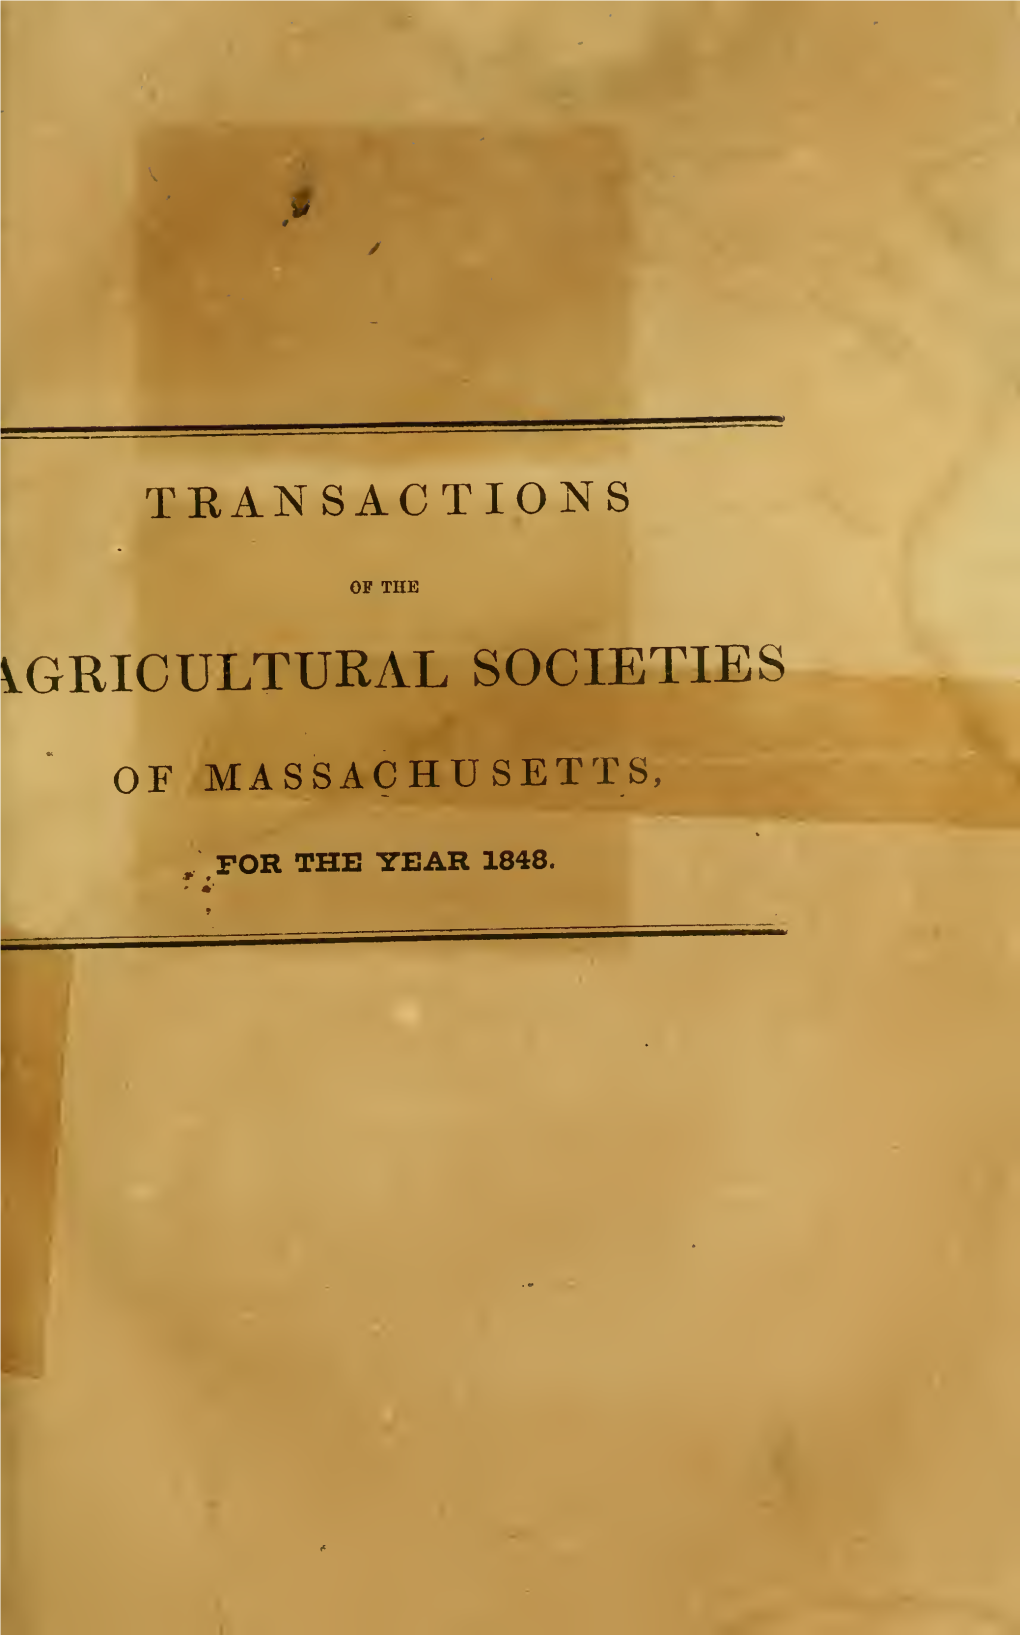 Transactions of the Agricultural Societies of Massachusetts